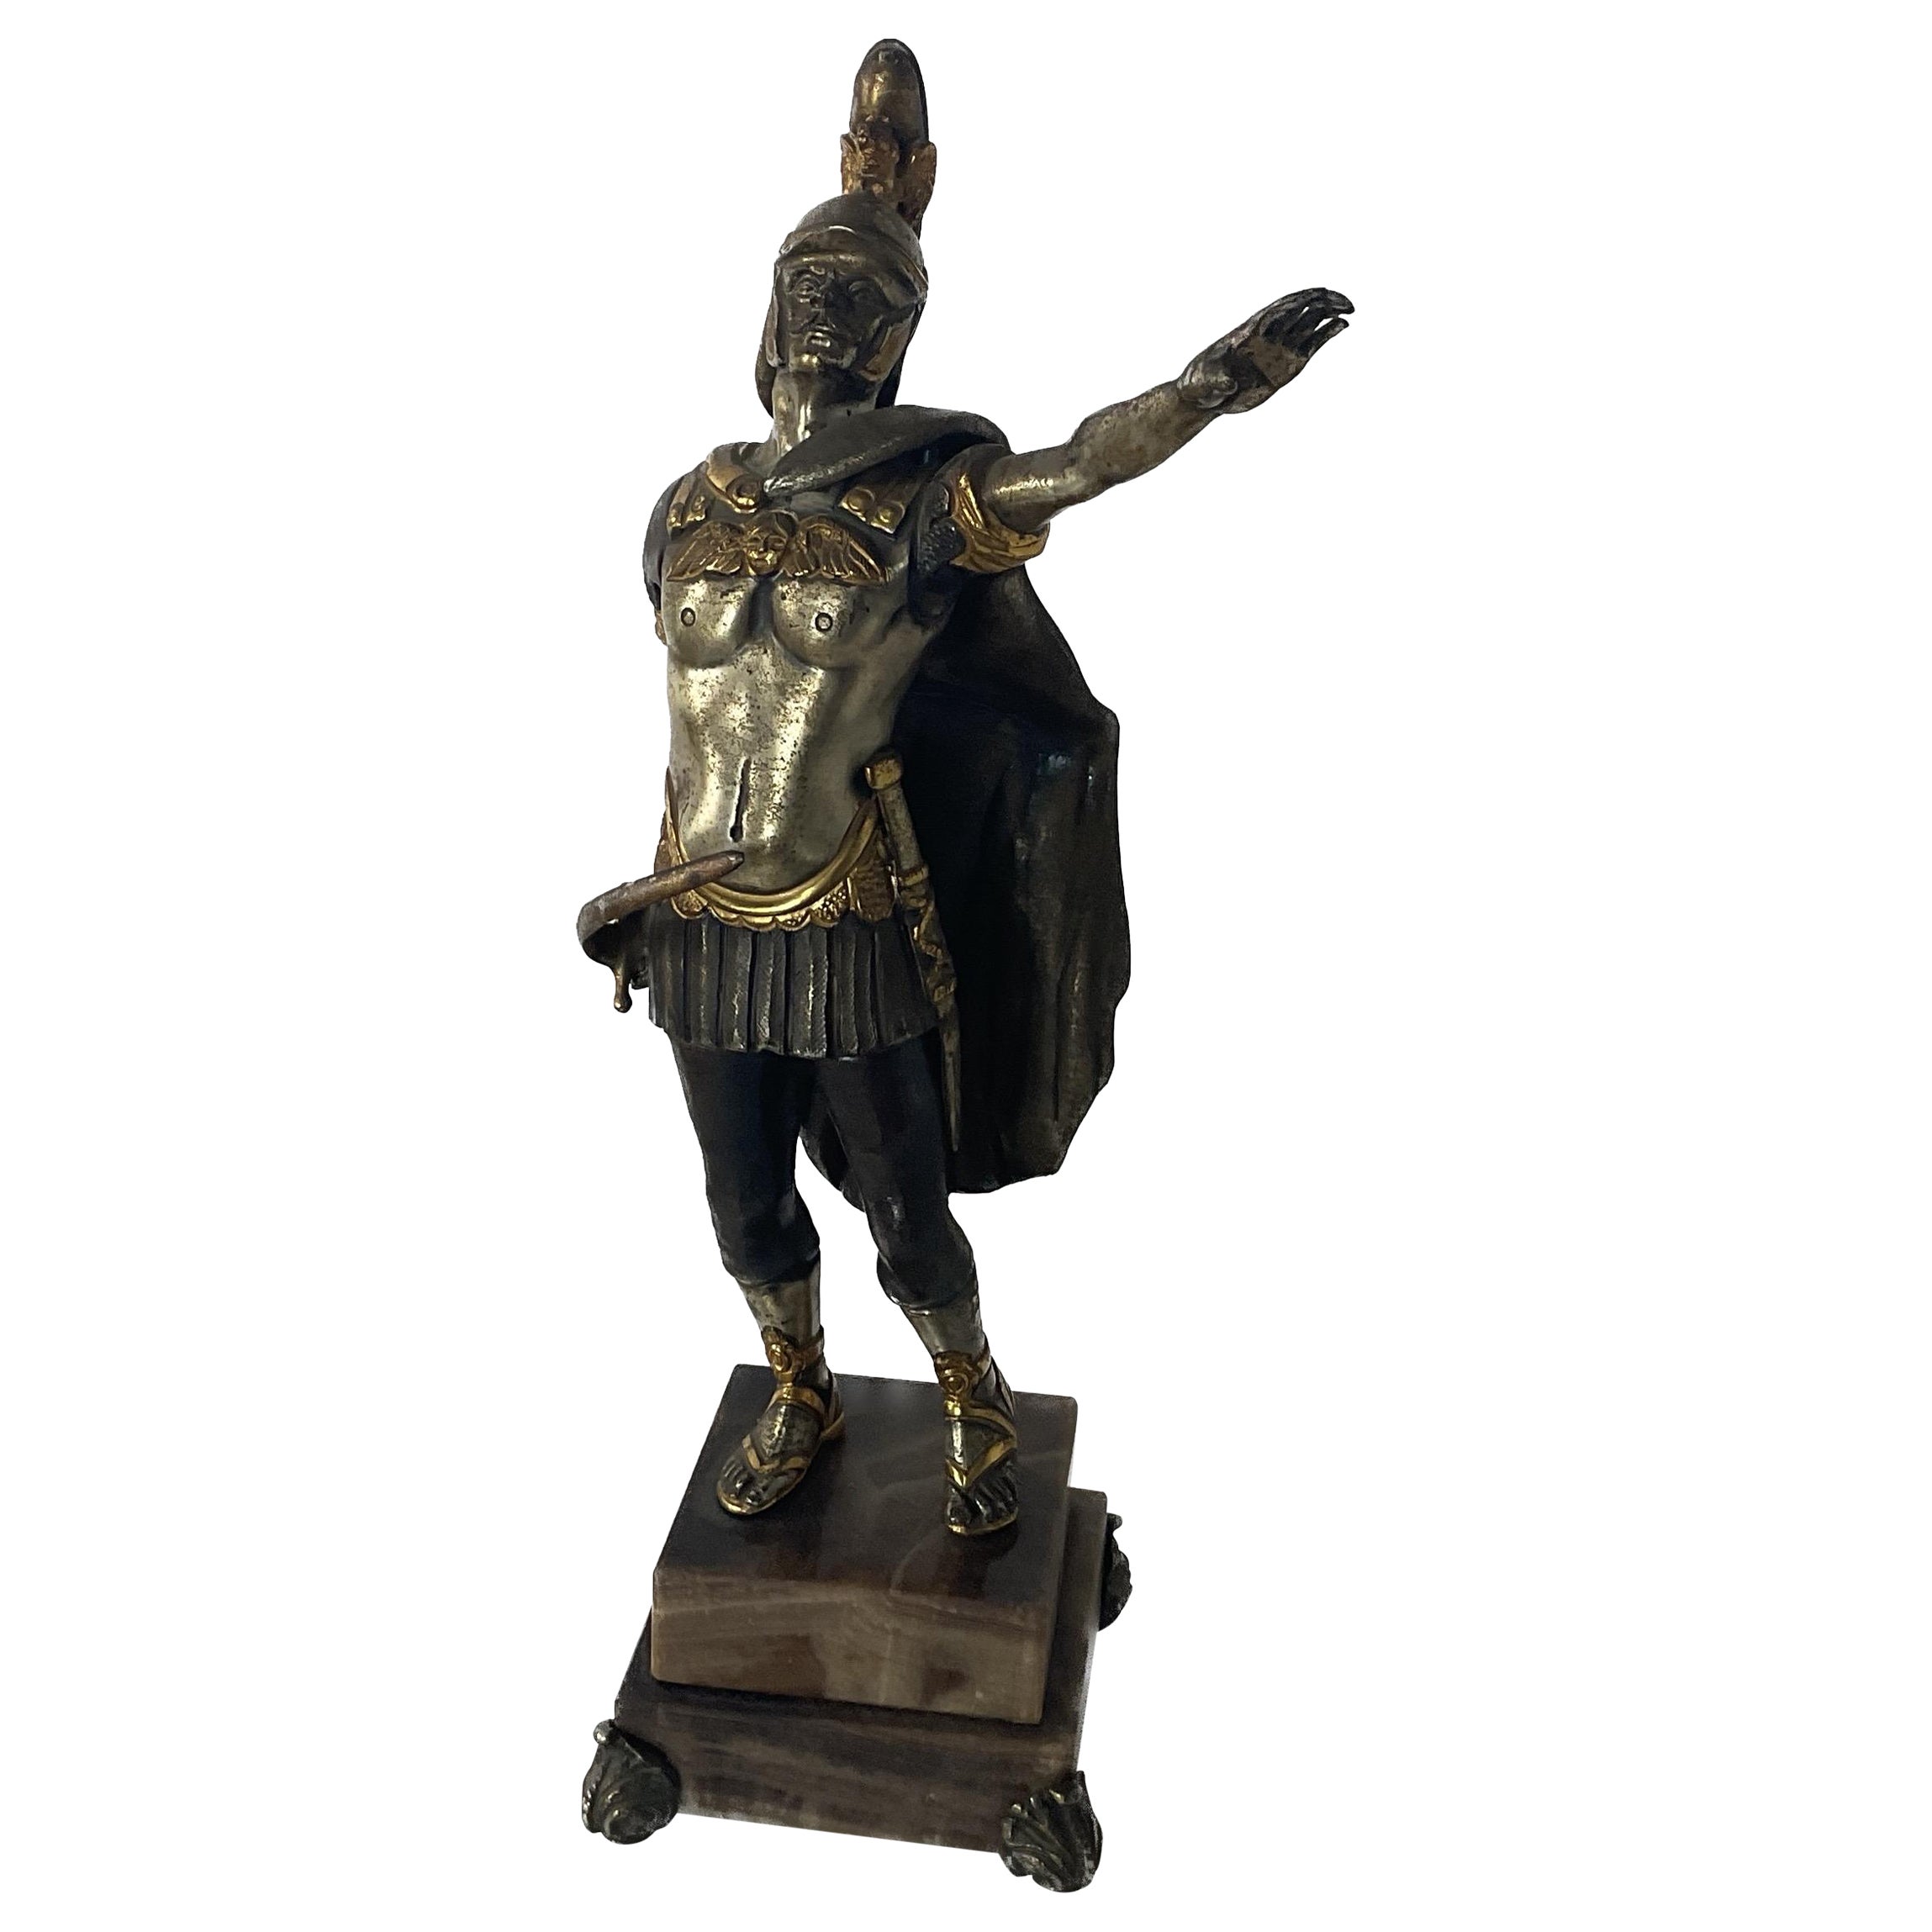 Figurine of the Roman Empire of Giuseppe Vasari of the 70s For Sale